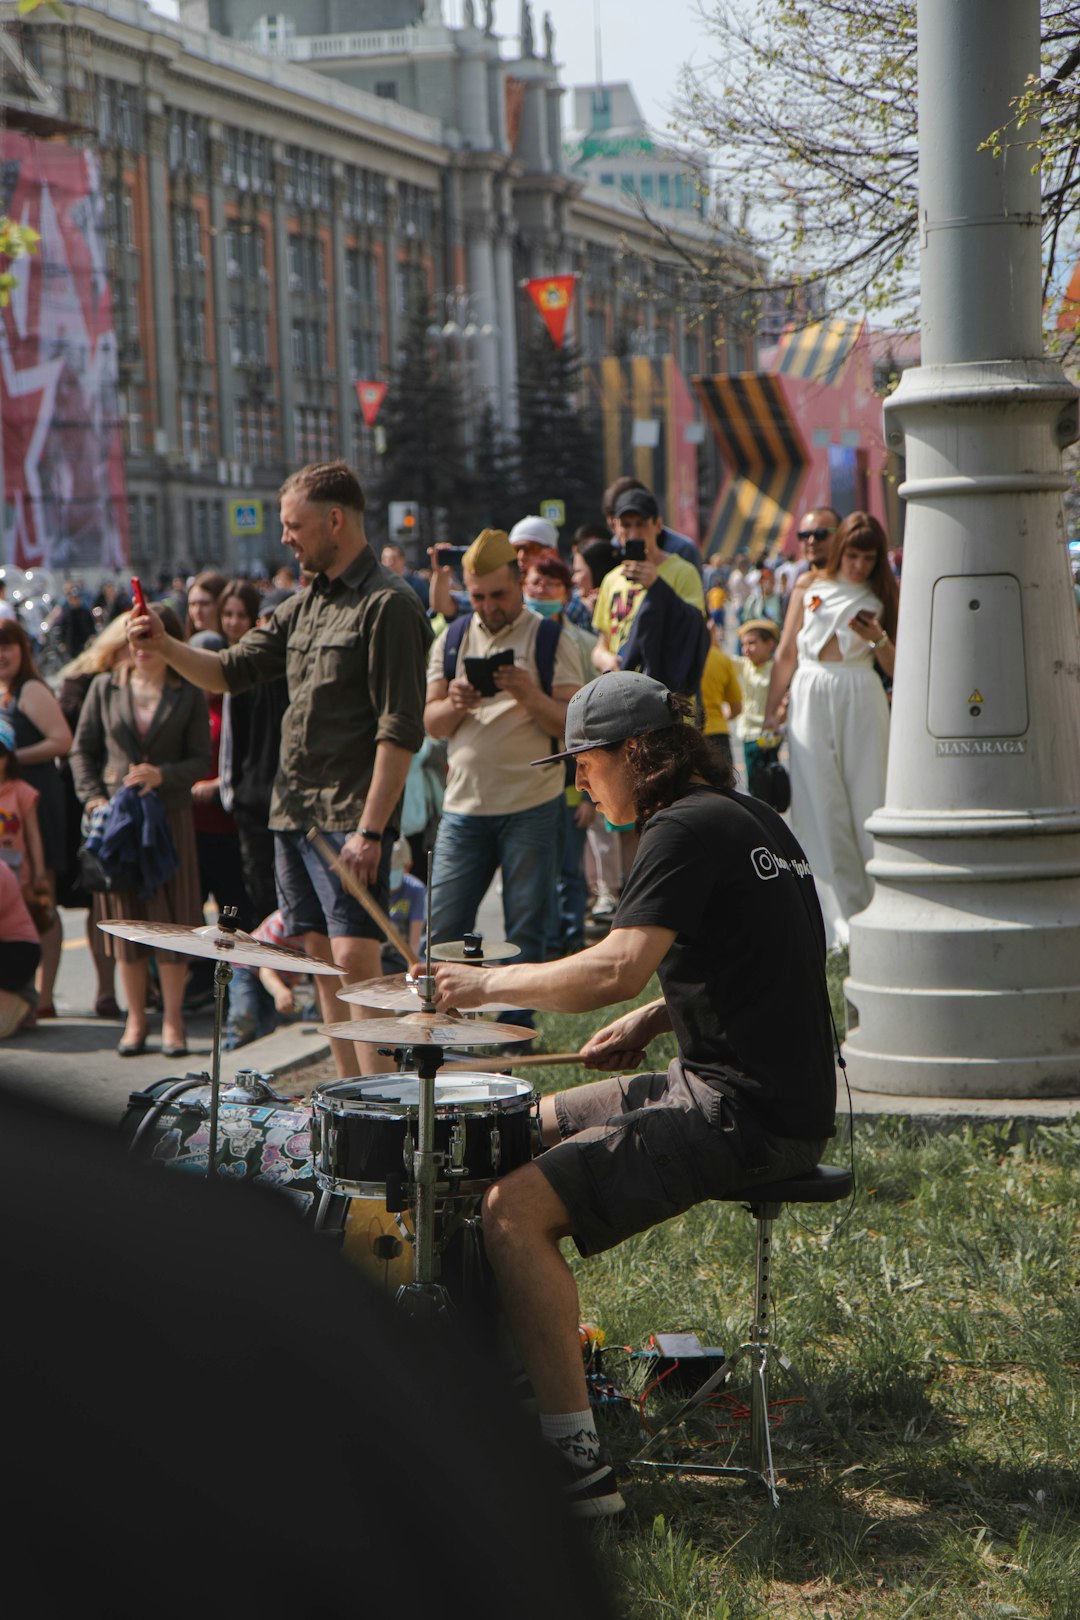 people playing musical instruments on street during daytime